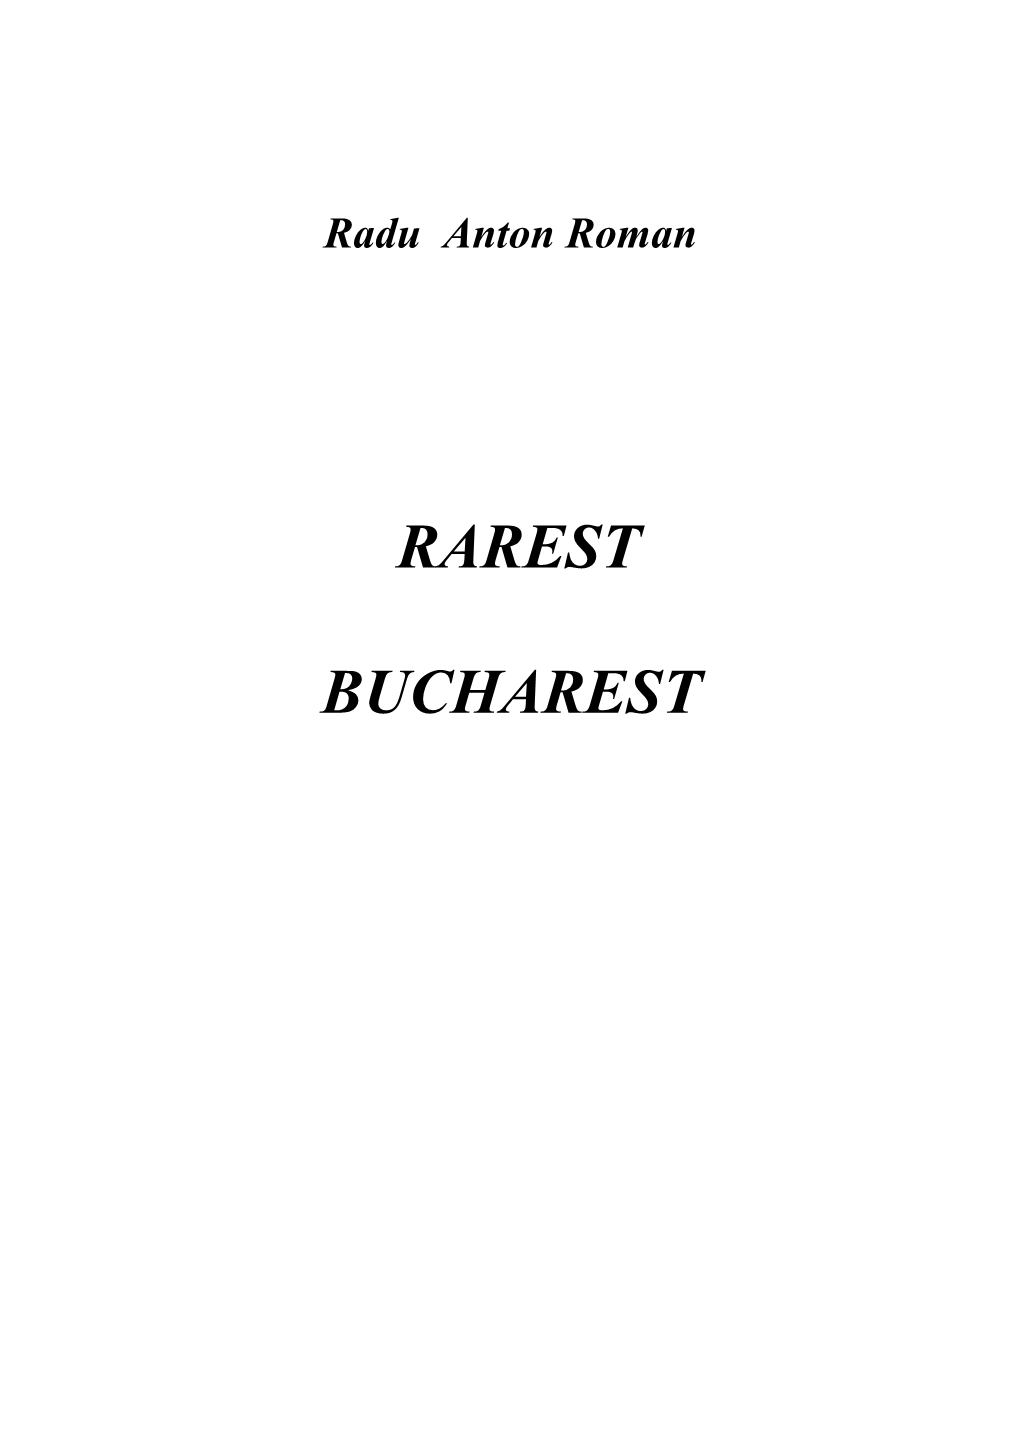 Rarest Bucharest, Poorest but Cheerest Would Be Today Queerest and Leeriest